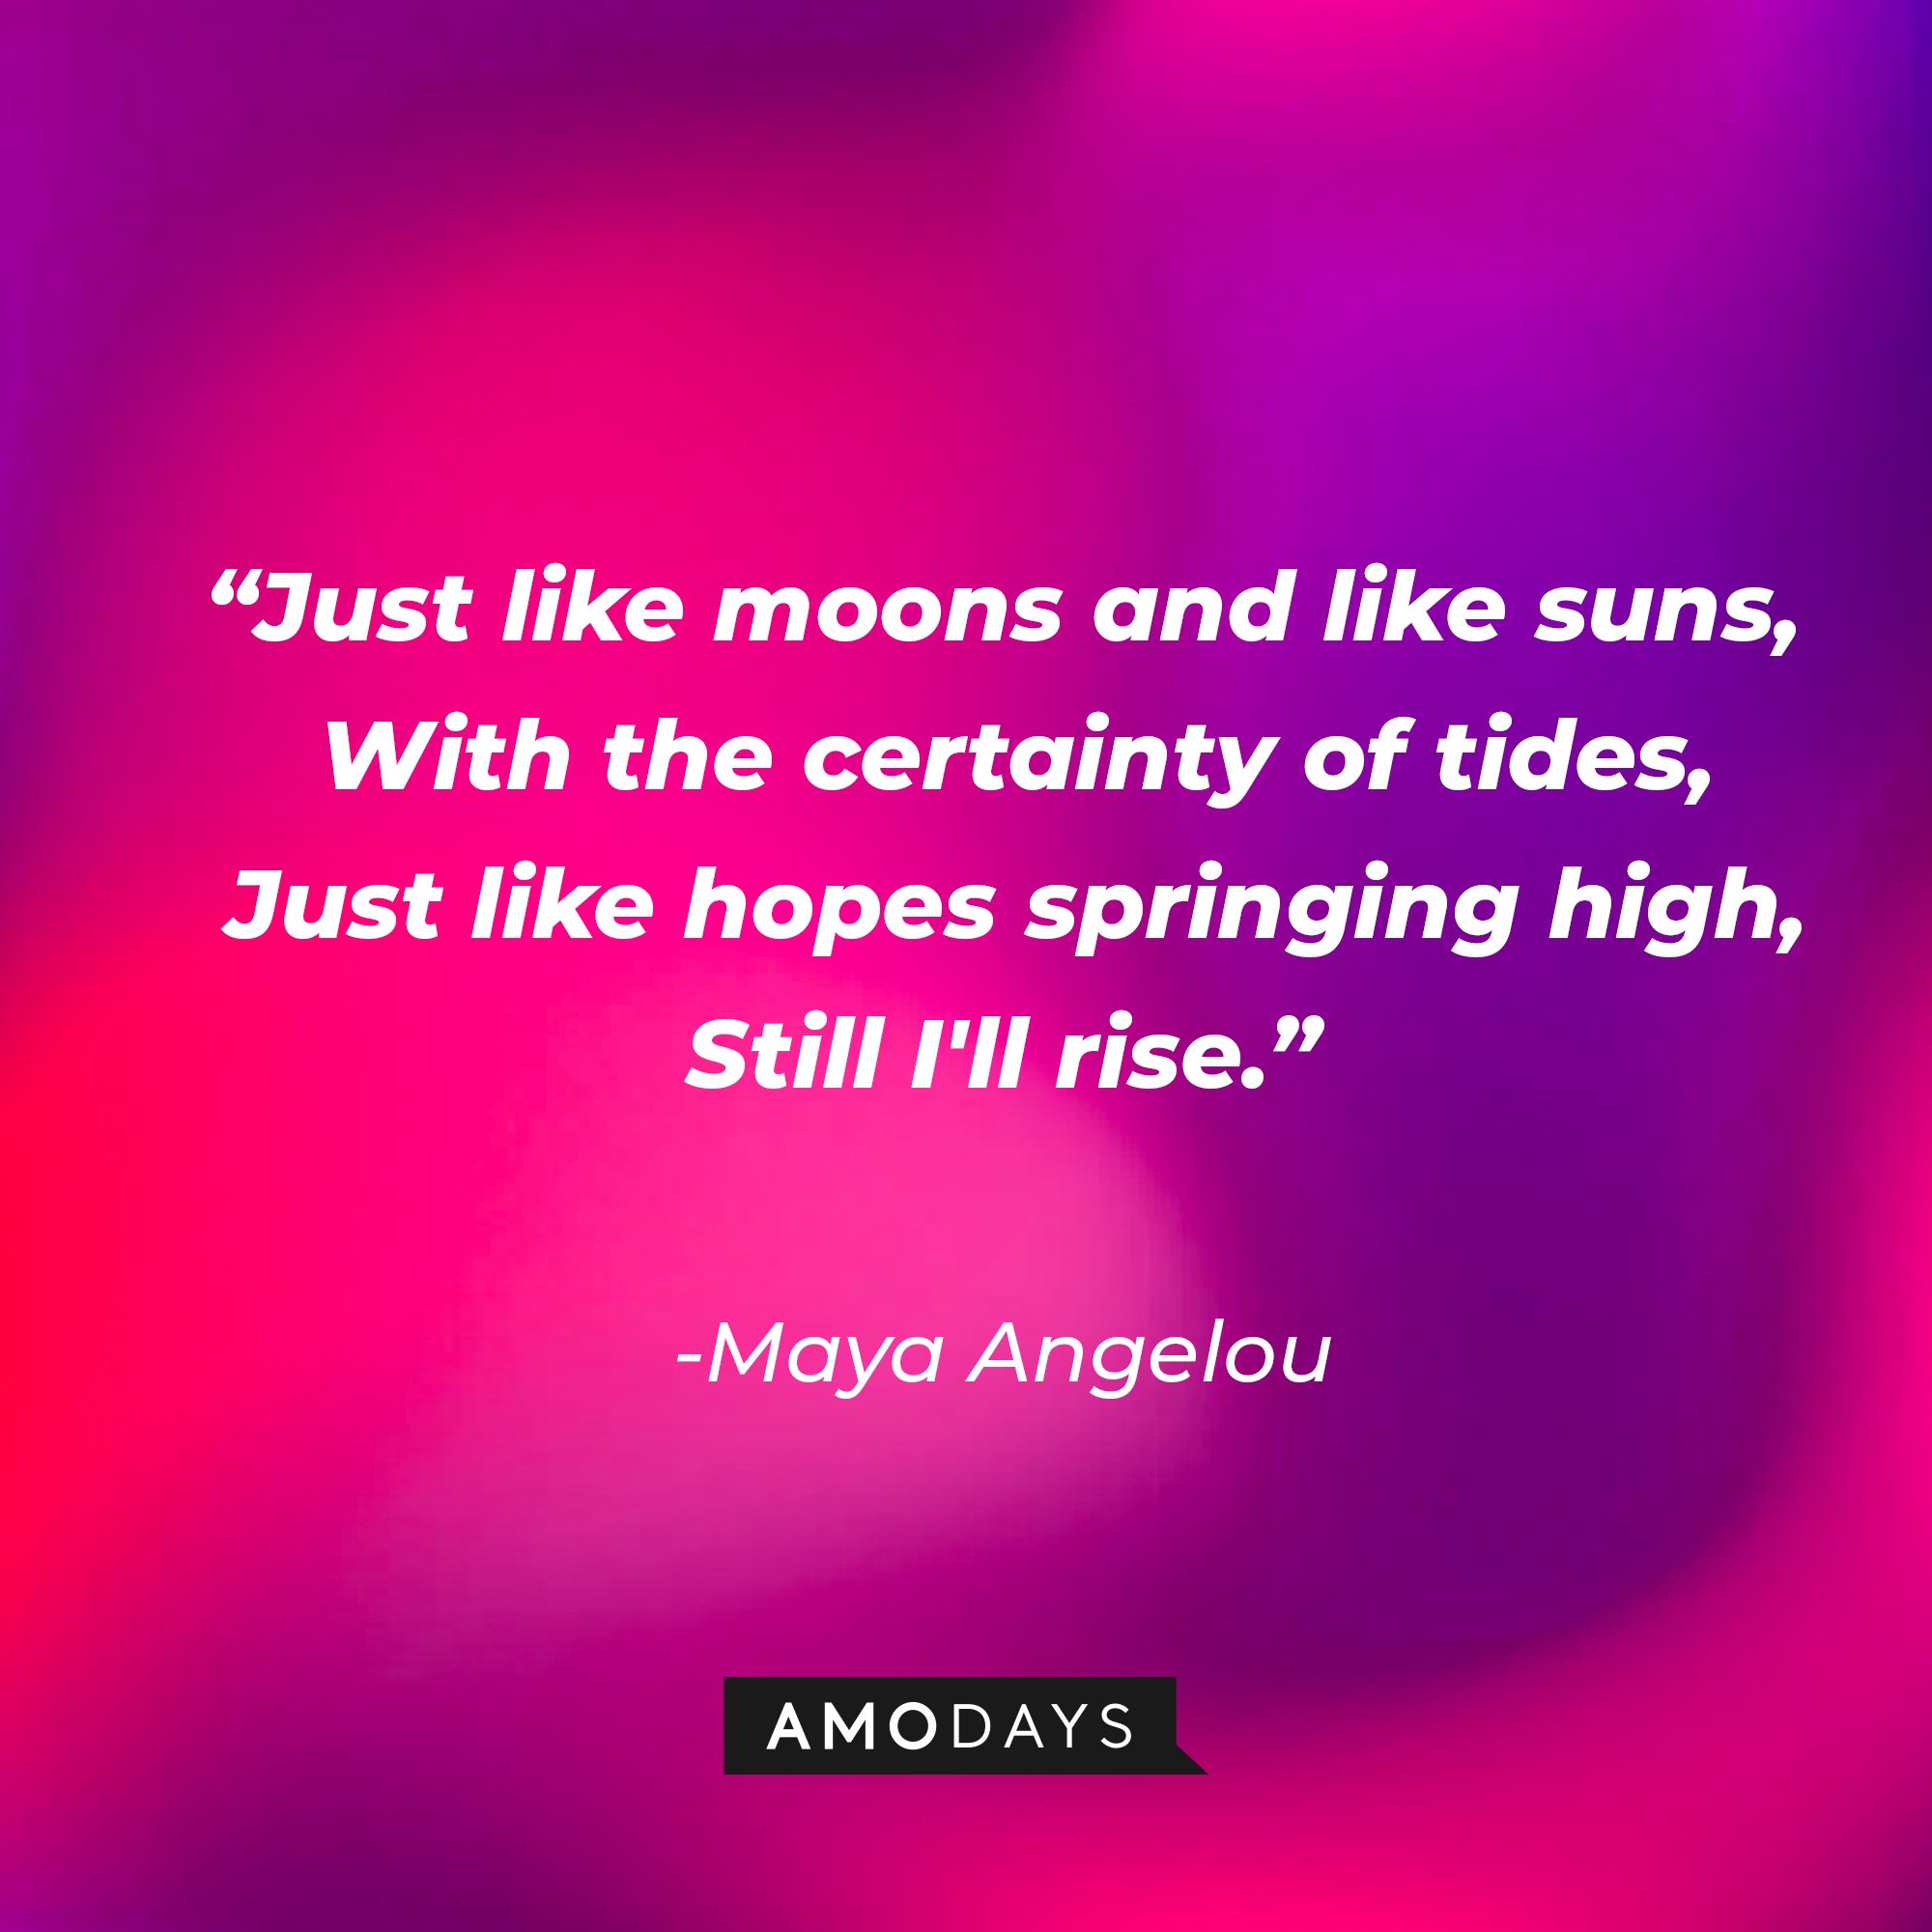 Maya Angelou's quote: "“Just like moons and like suns,  With the certainty of tides,  Just like hopes springing high,  Still I'll rise.” | Image: AmoDays